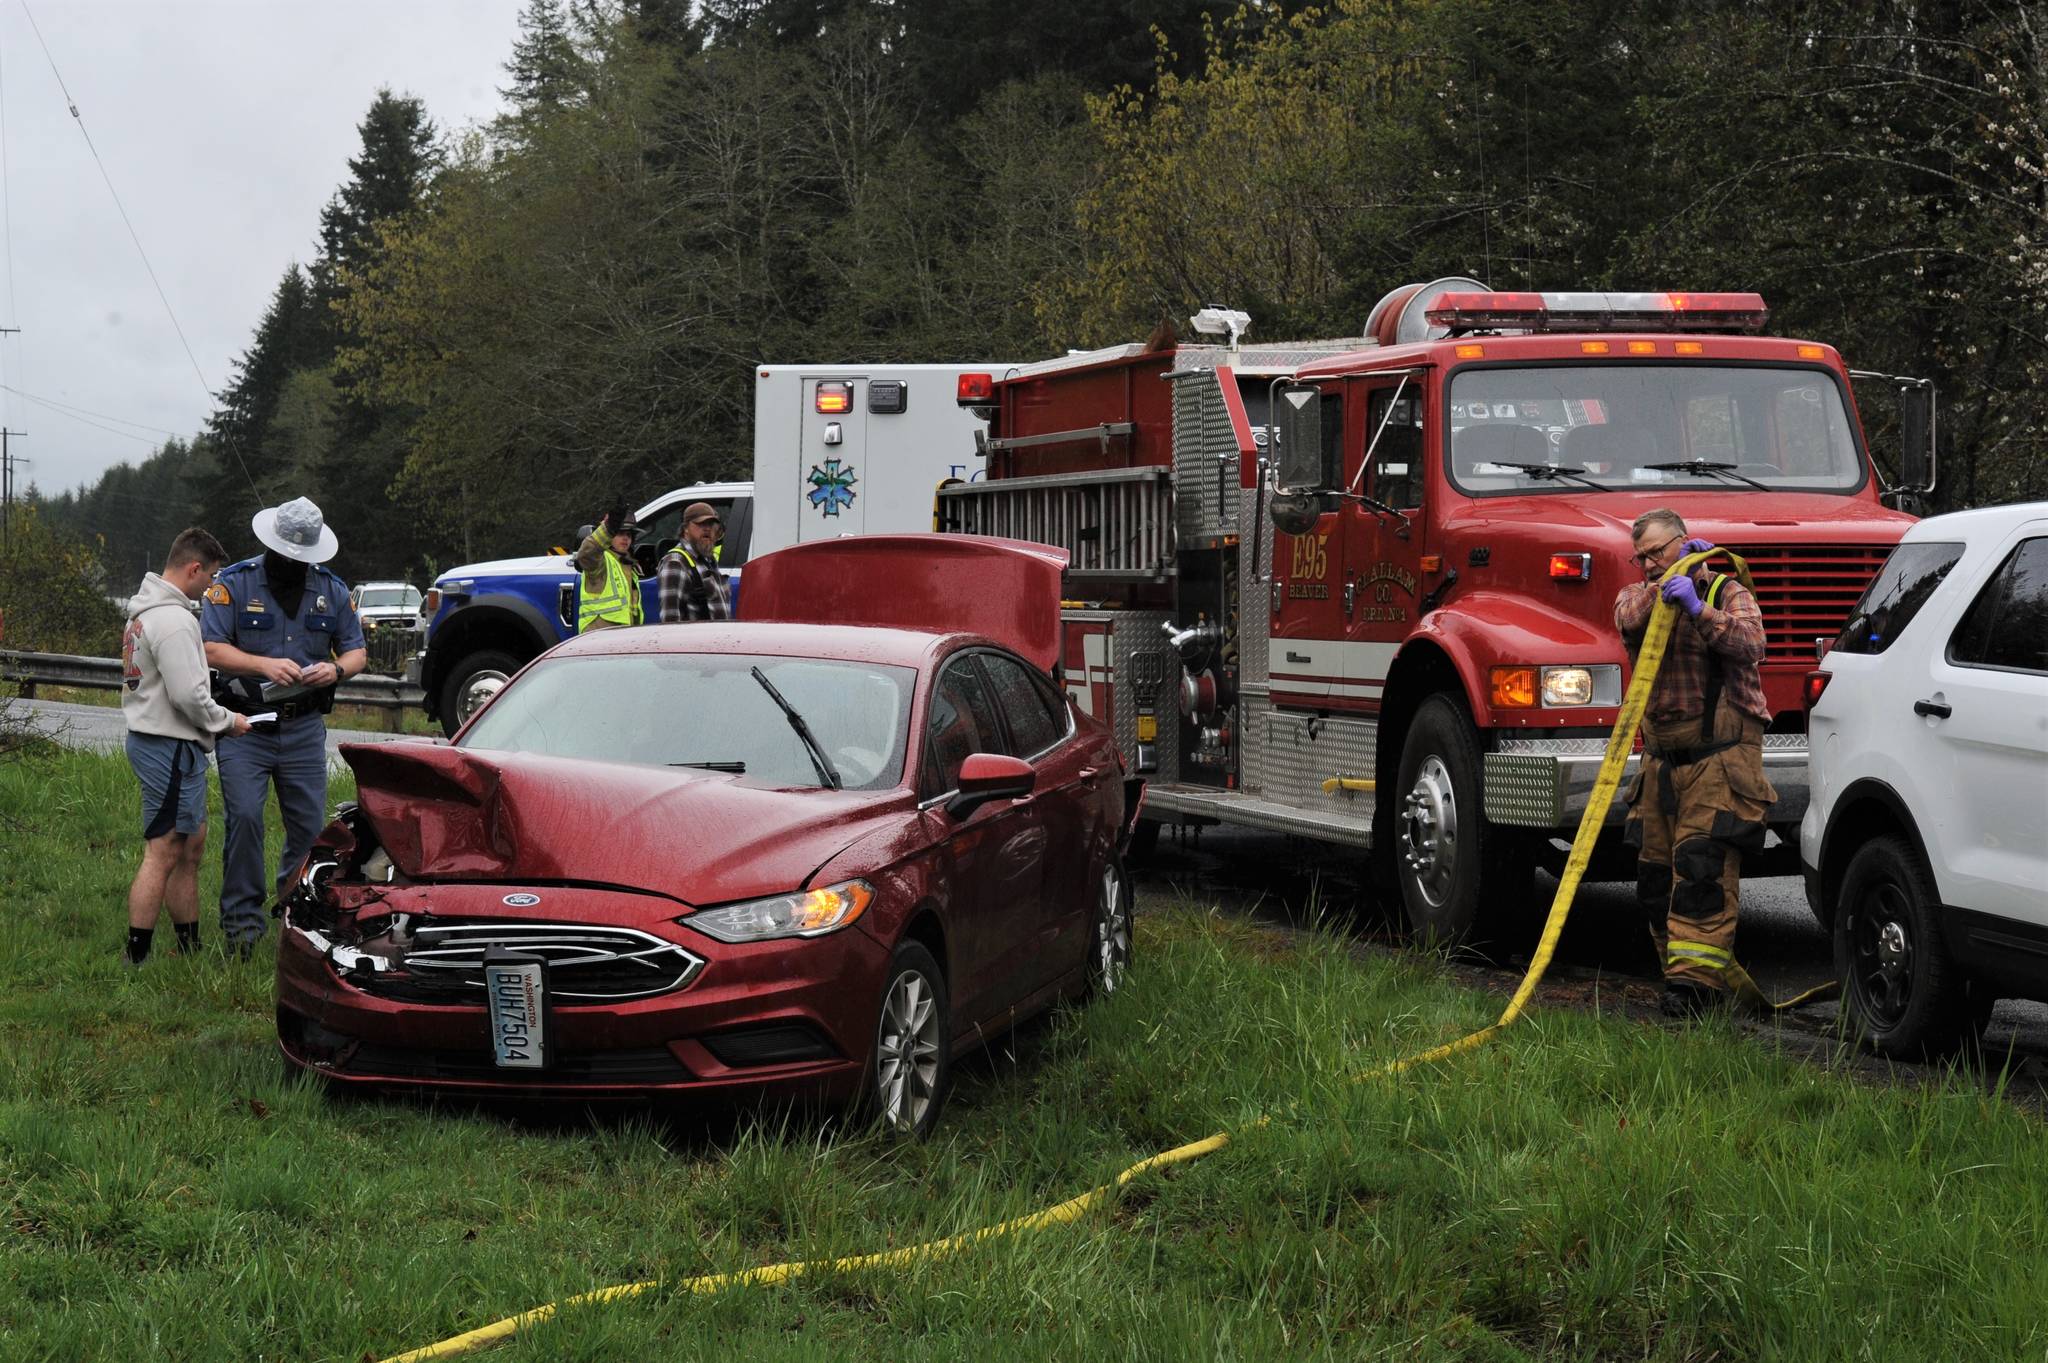 This three-vehicle accident occurred at approximately 1:30 p.m., last Saturday near the Bear Creek Bridge Milepost 206. One teenager was taken to the Forks Memorial Hospital by Forks Ambulance. Fire District 1 and the WSP were at the scene. Photo by Lonnie Archibald